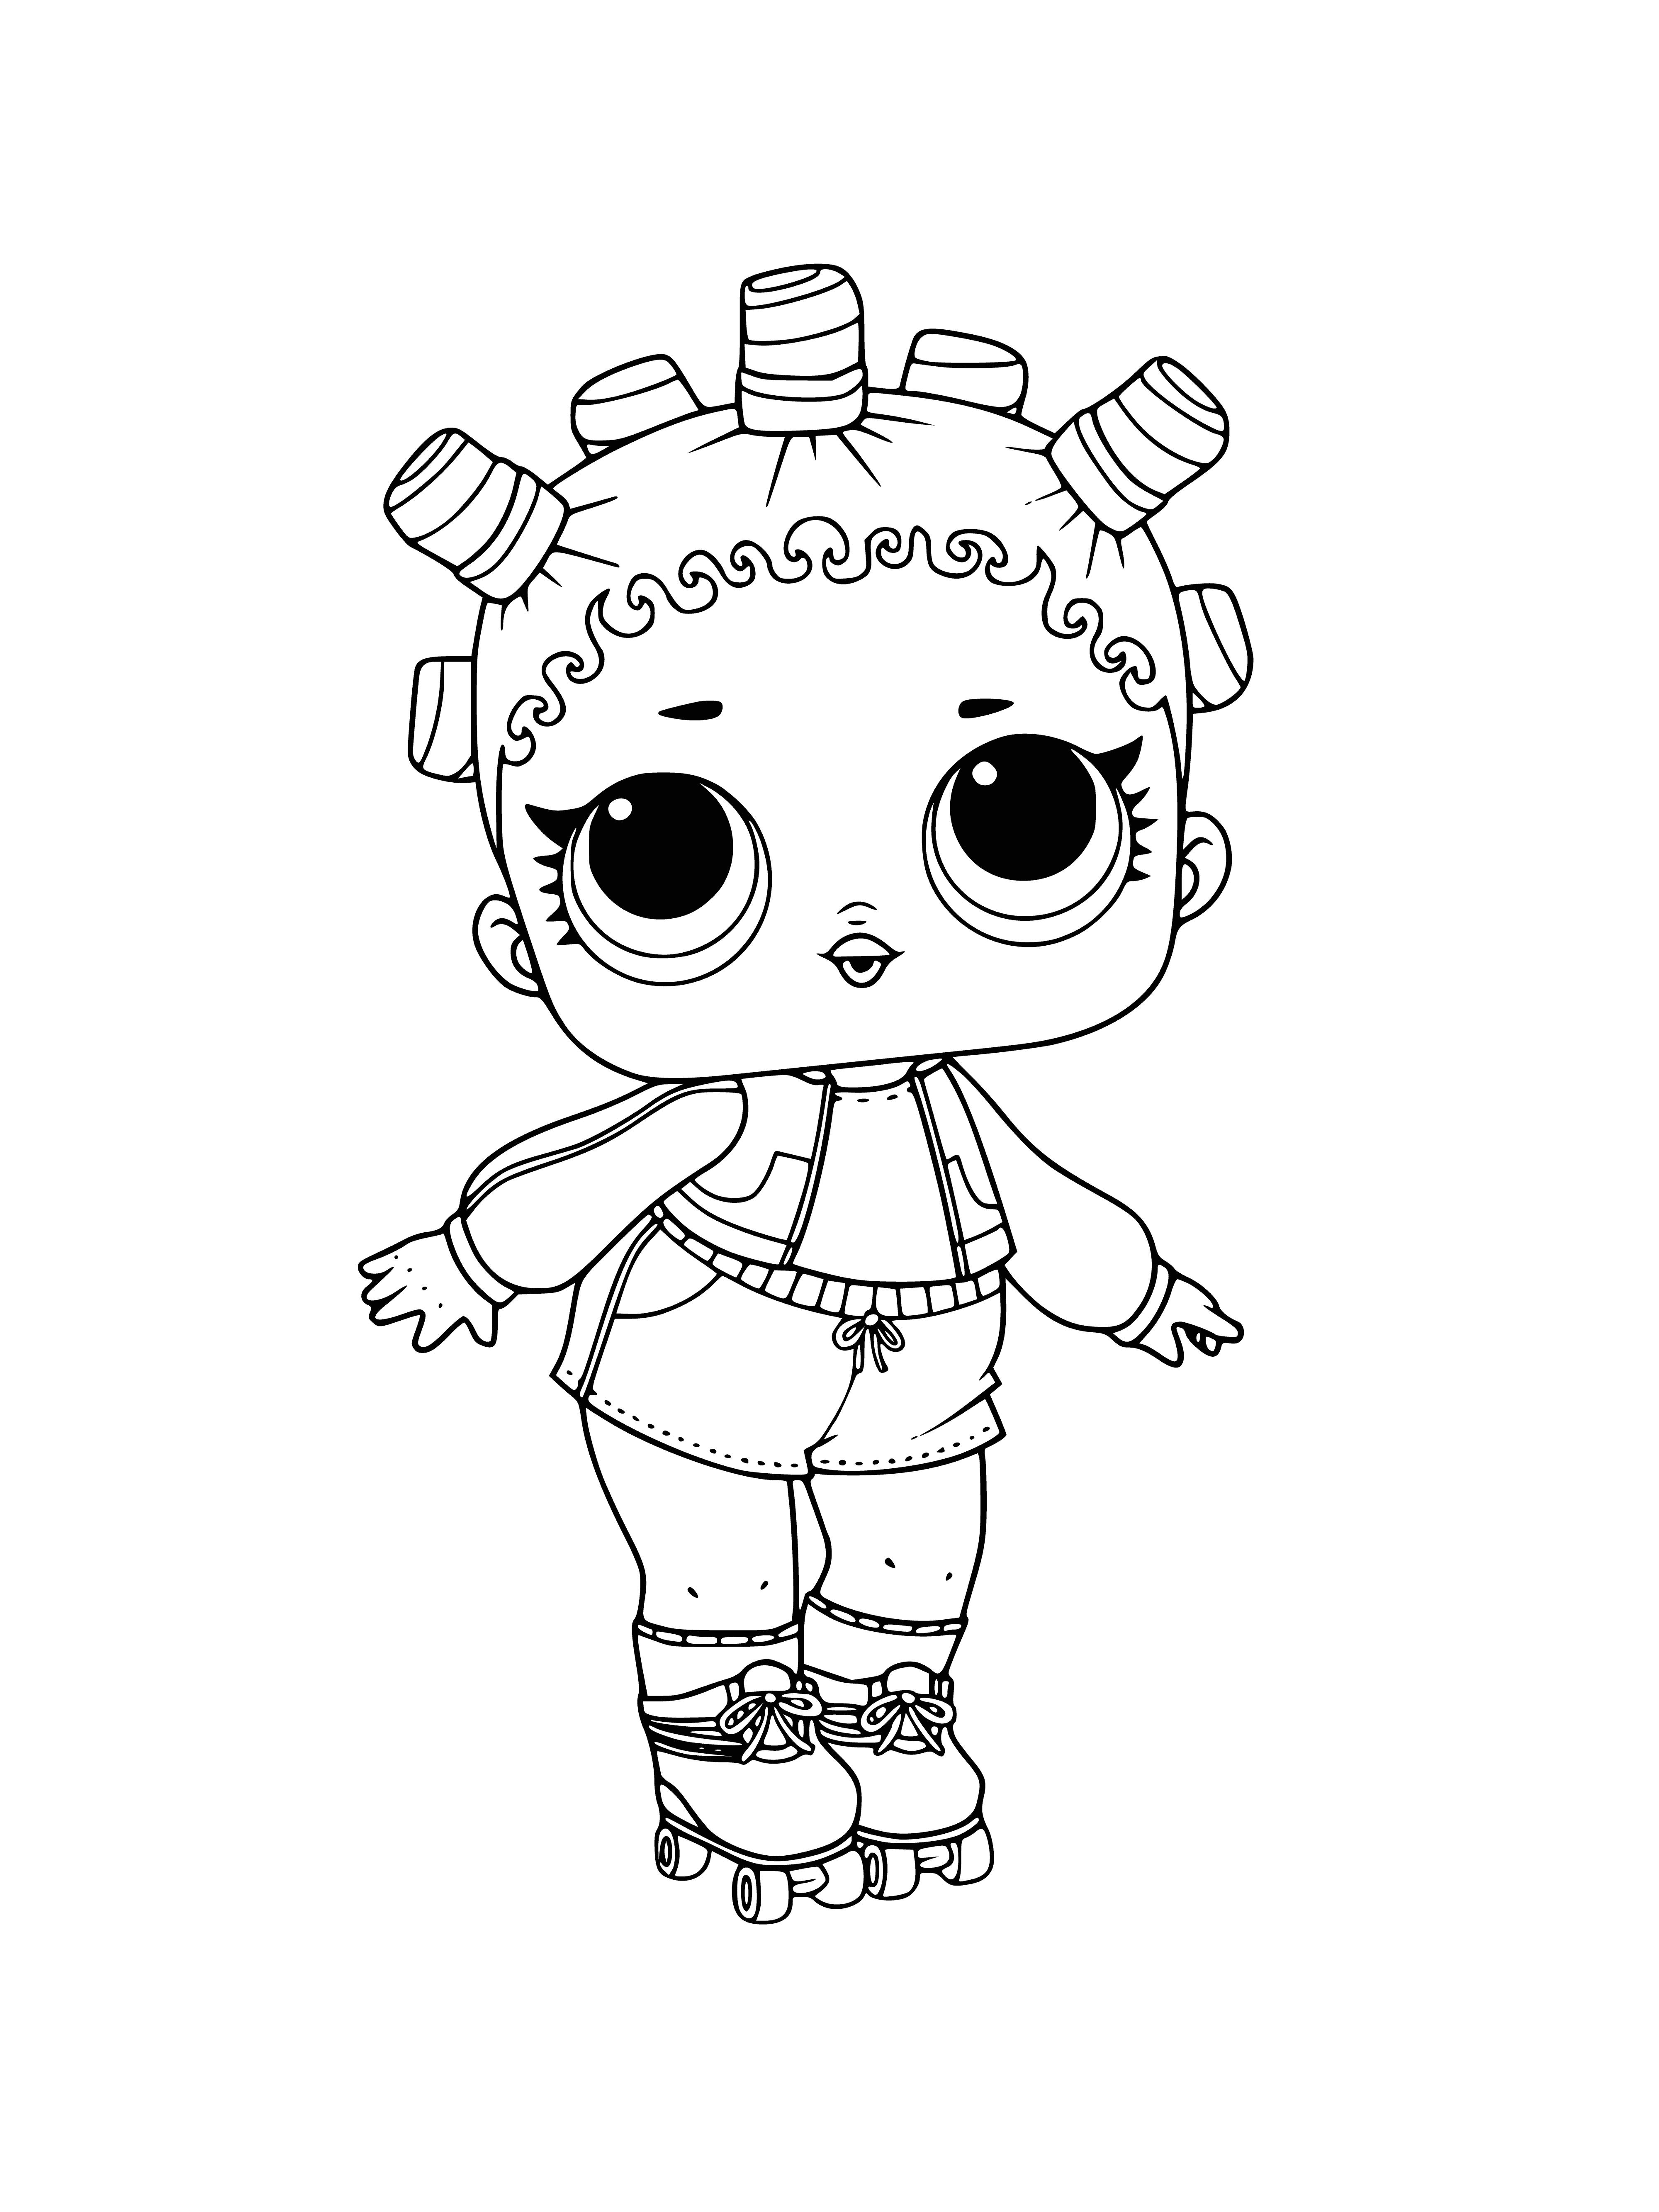 coloring page: Pink toy roller skater designed to look like a young girl, comes with a helmet and knee pads. #skating #toys